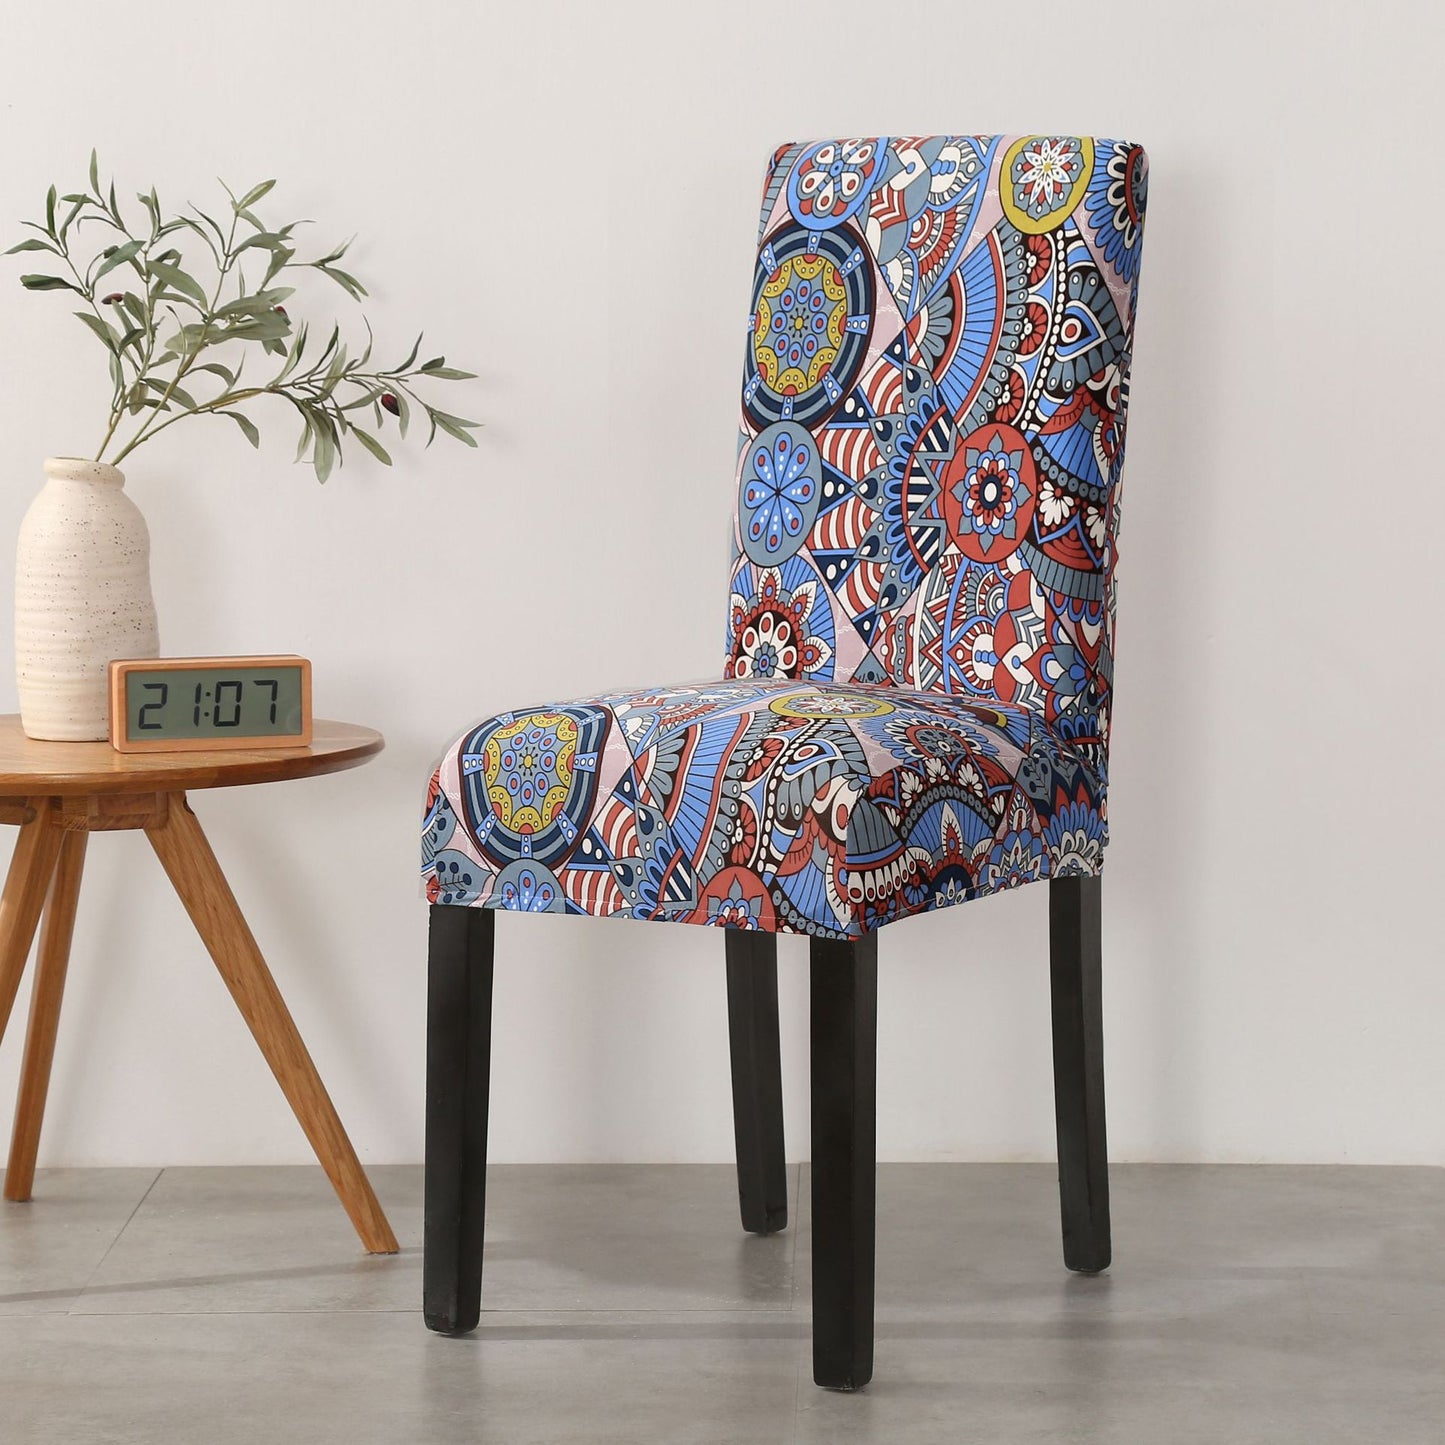 Elastic stool covers in different patterns 3